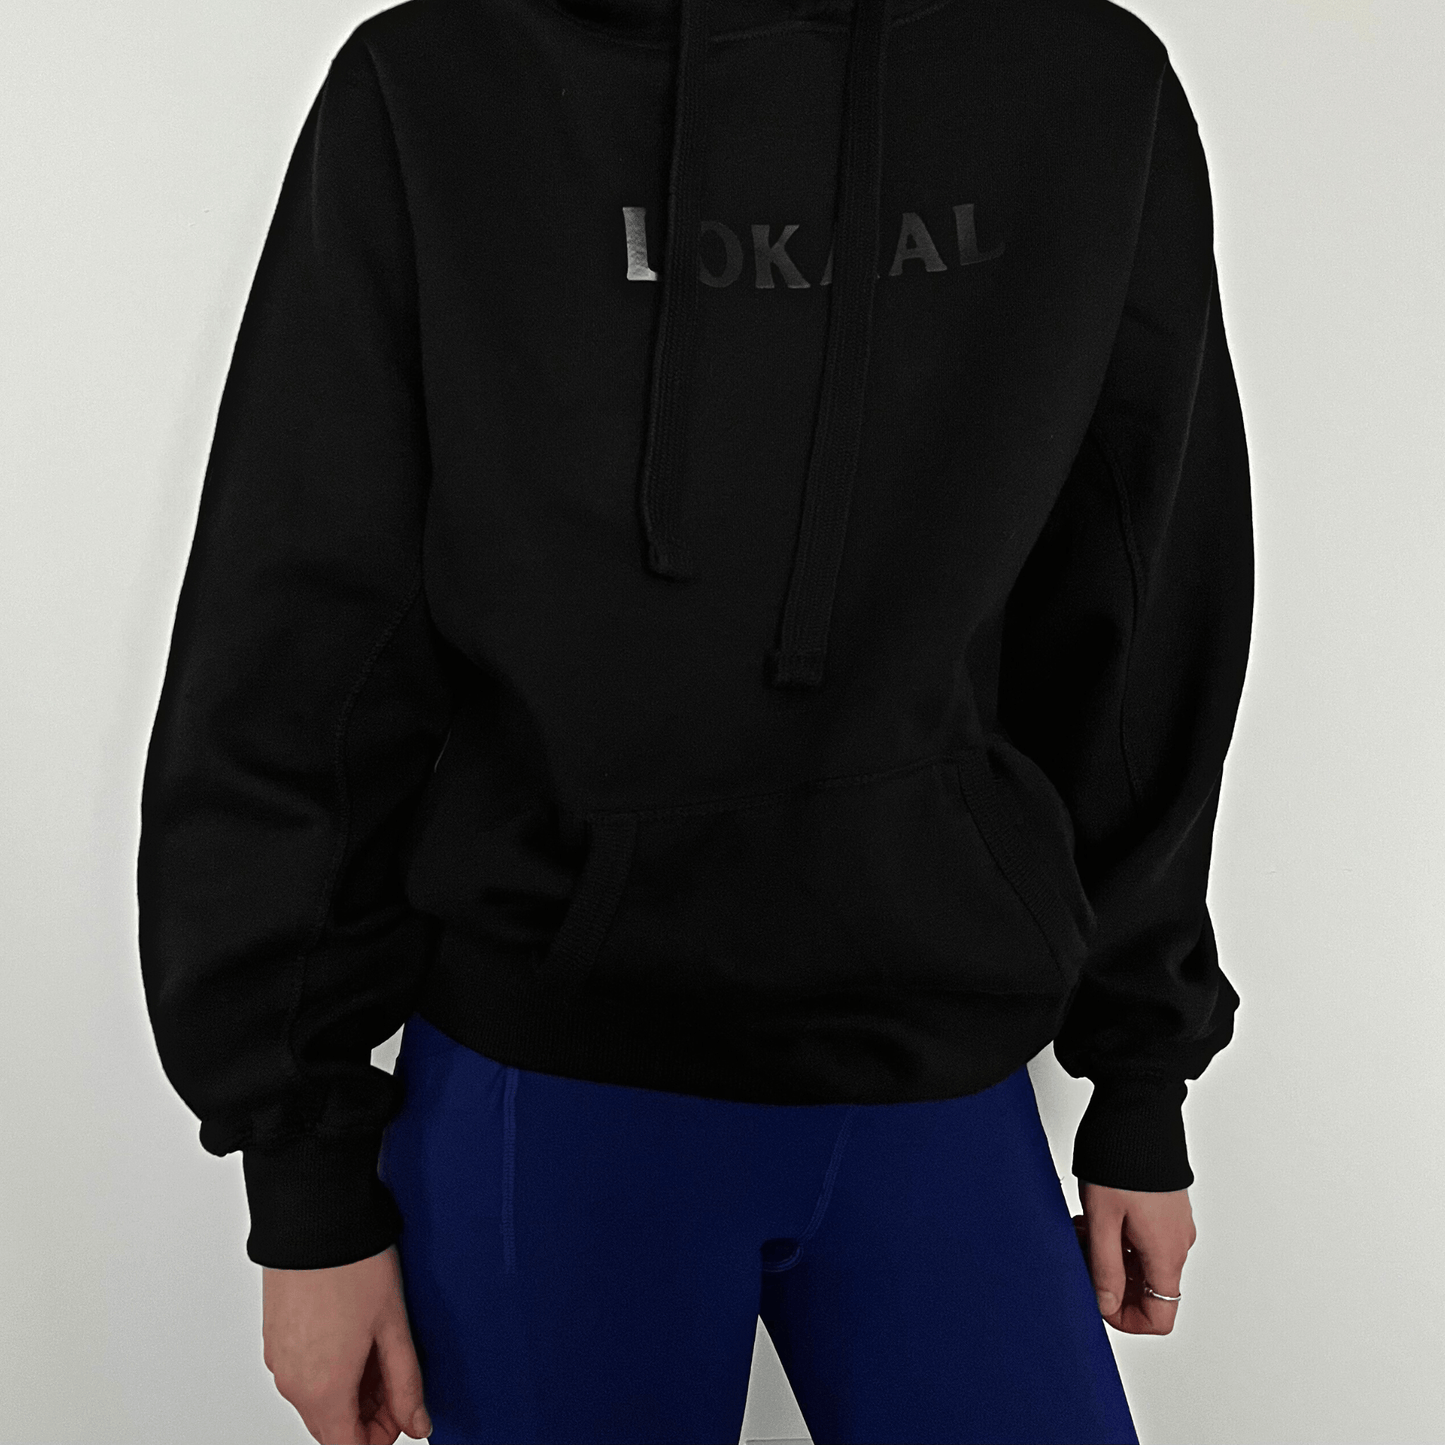 Lokaal unisex heavyweight hoodie, black, sweater, comfy, fitted, casual, business casual, hoodie